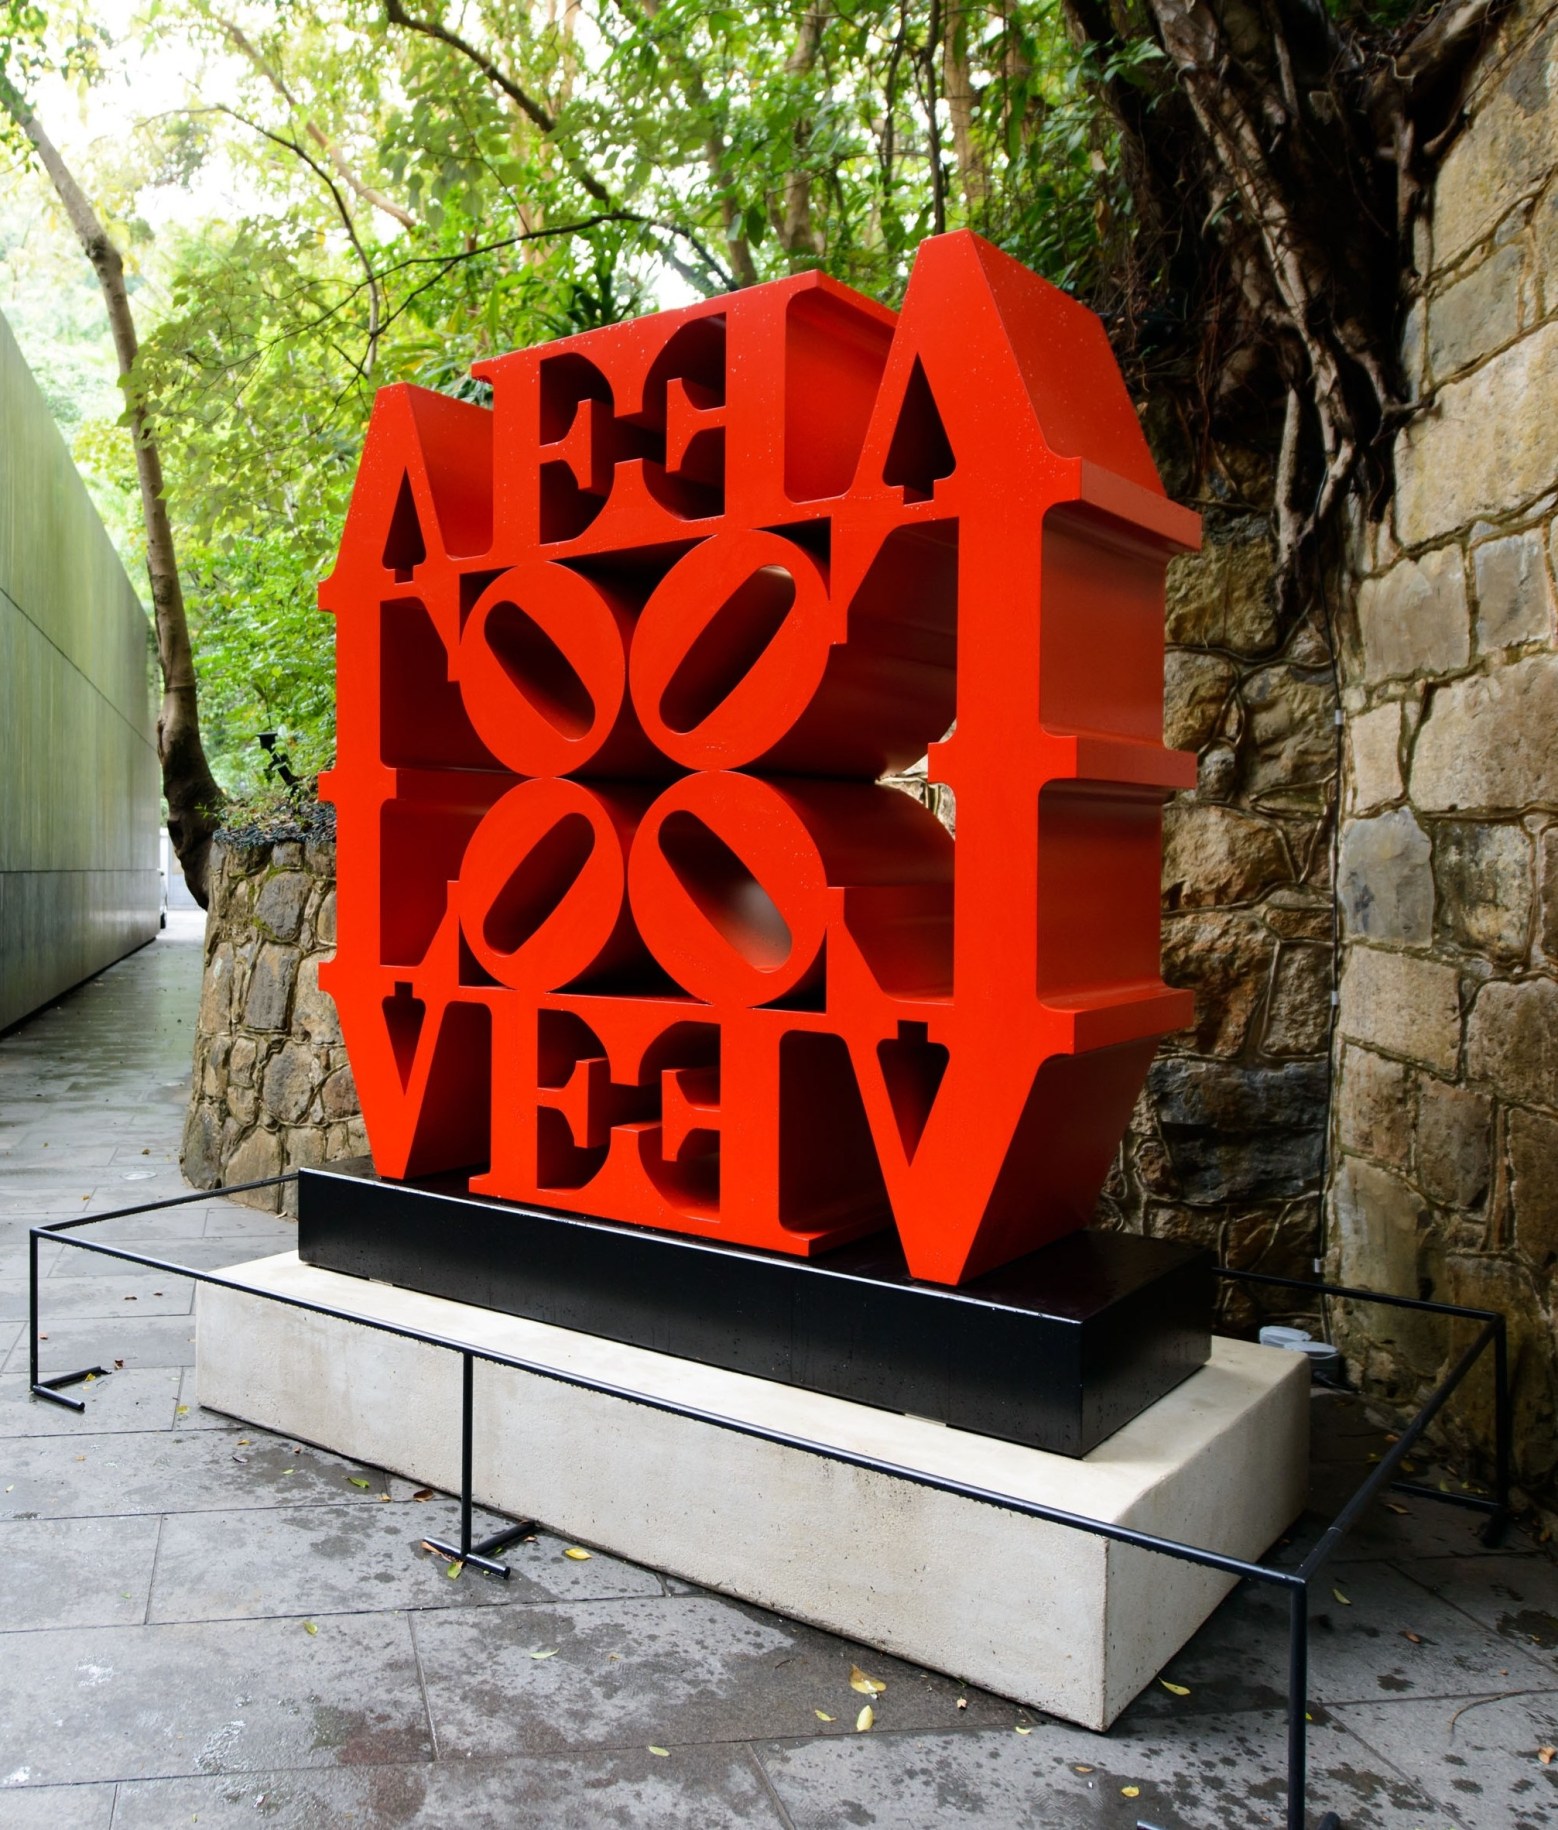 LOVE Wall, a 72 by 72 by 24 inch red polychrome aluminum sculpture consisting of four LOVEs, each with the letters L and a tilted O above the letters V and E. , Two of the LOVEs are upright and two inverted, all facing inward with the four &ldquo;O&rdquo;s meeting in the center.